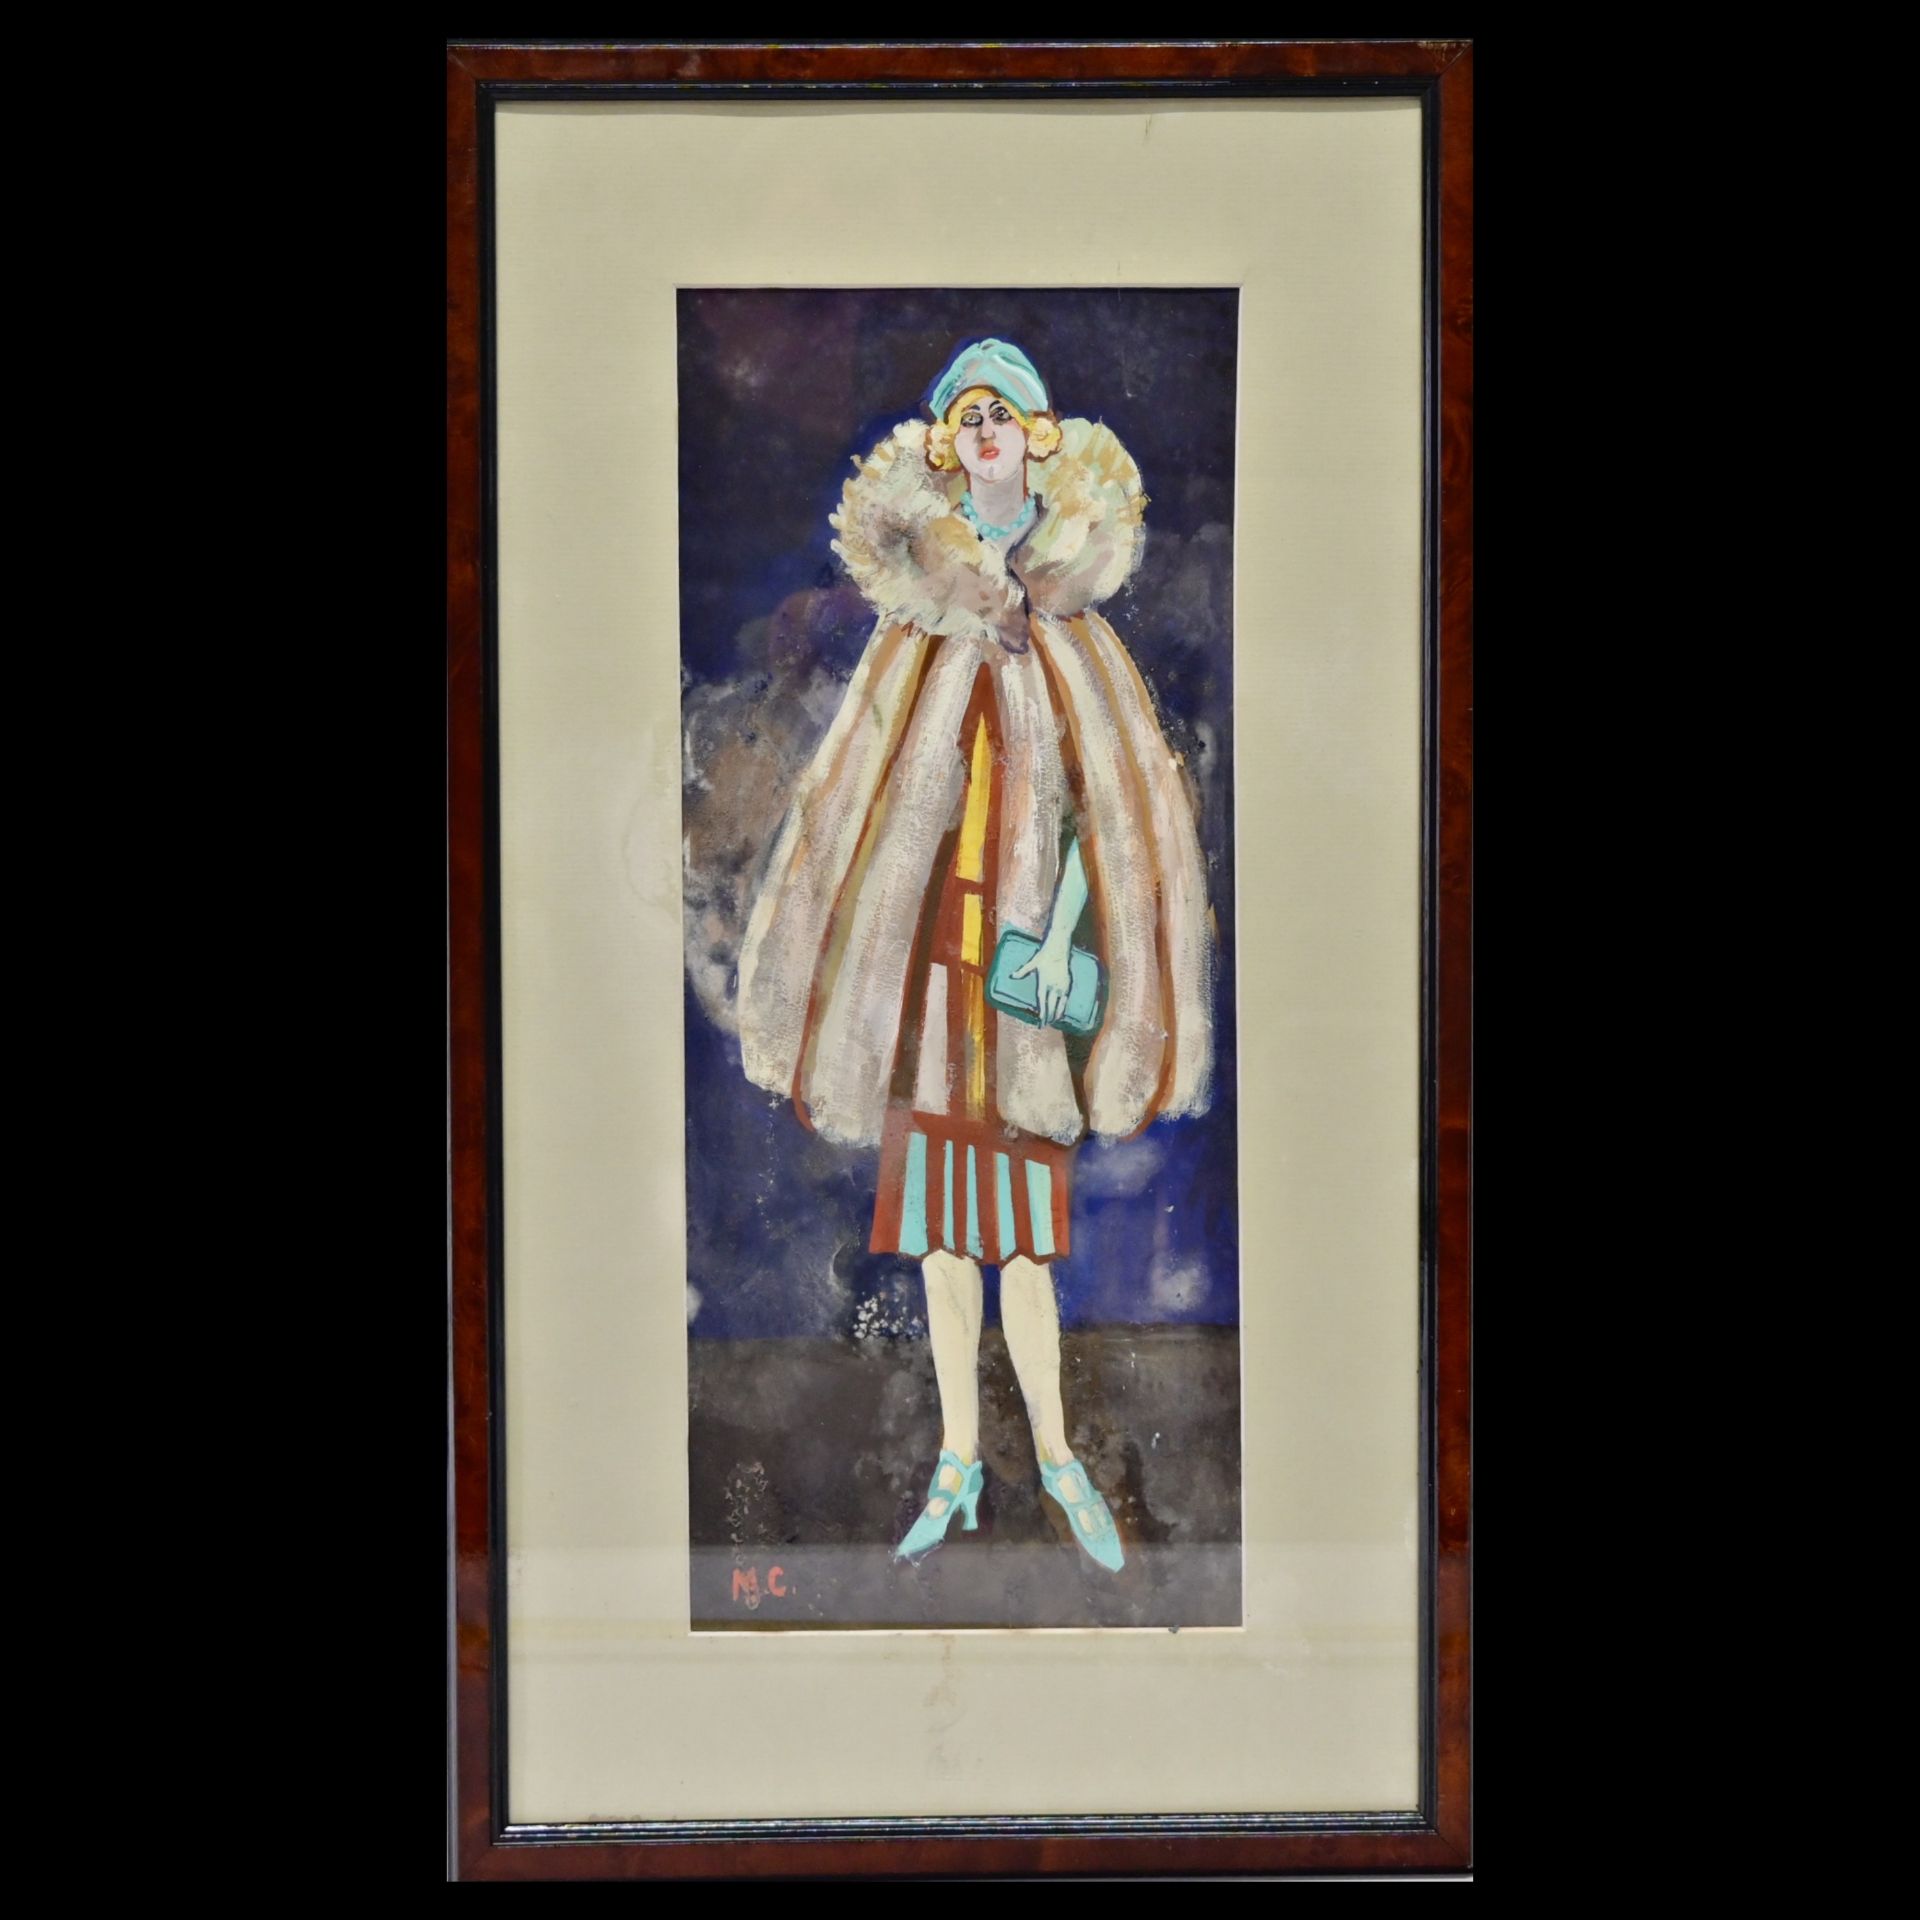 Art Deco Fashion clothing, watercolor on paper, signature of the author by "M C", France, 1920s. - Bild 2 aus 6